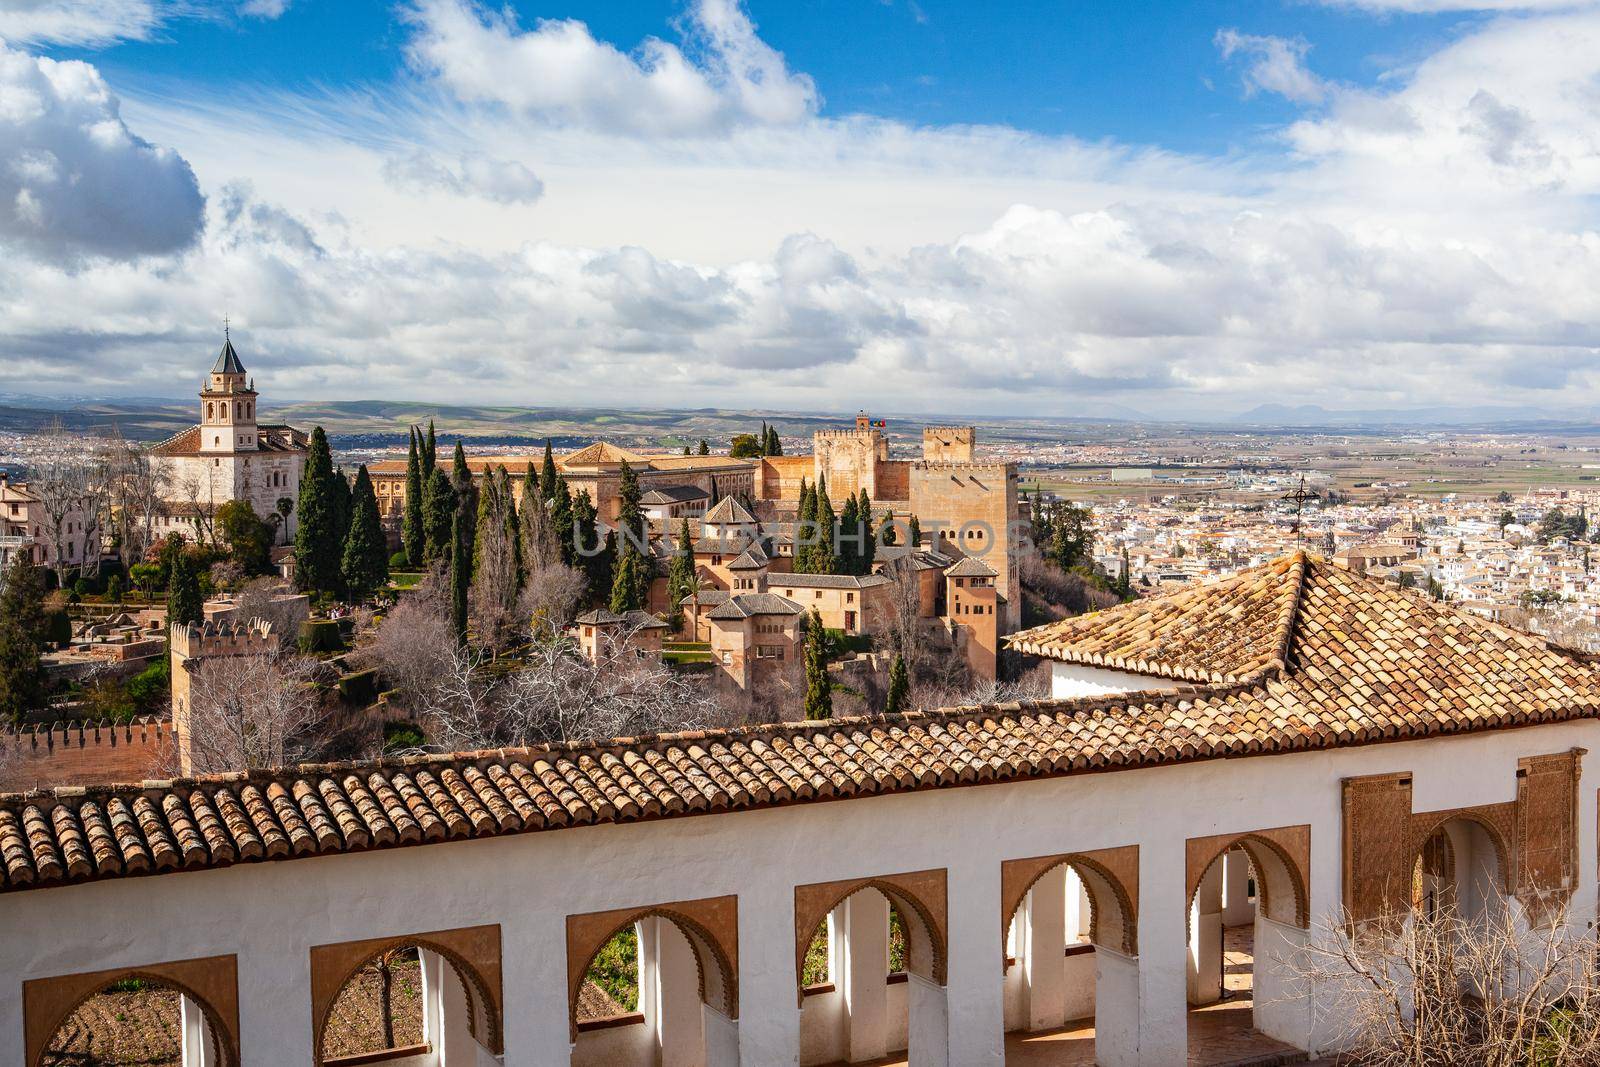 The Alhambra is a palace and fortress complex located in Granada, Andalusia, Spain.  by CaptureLight